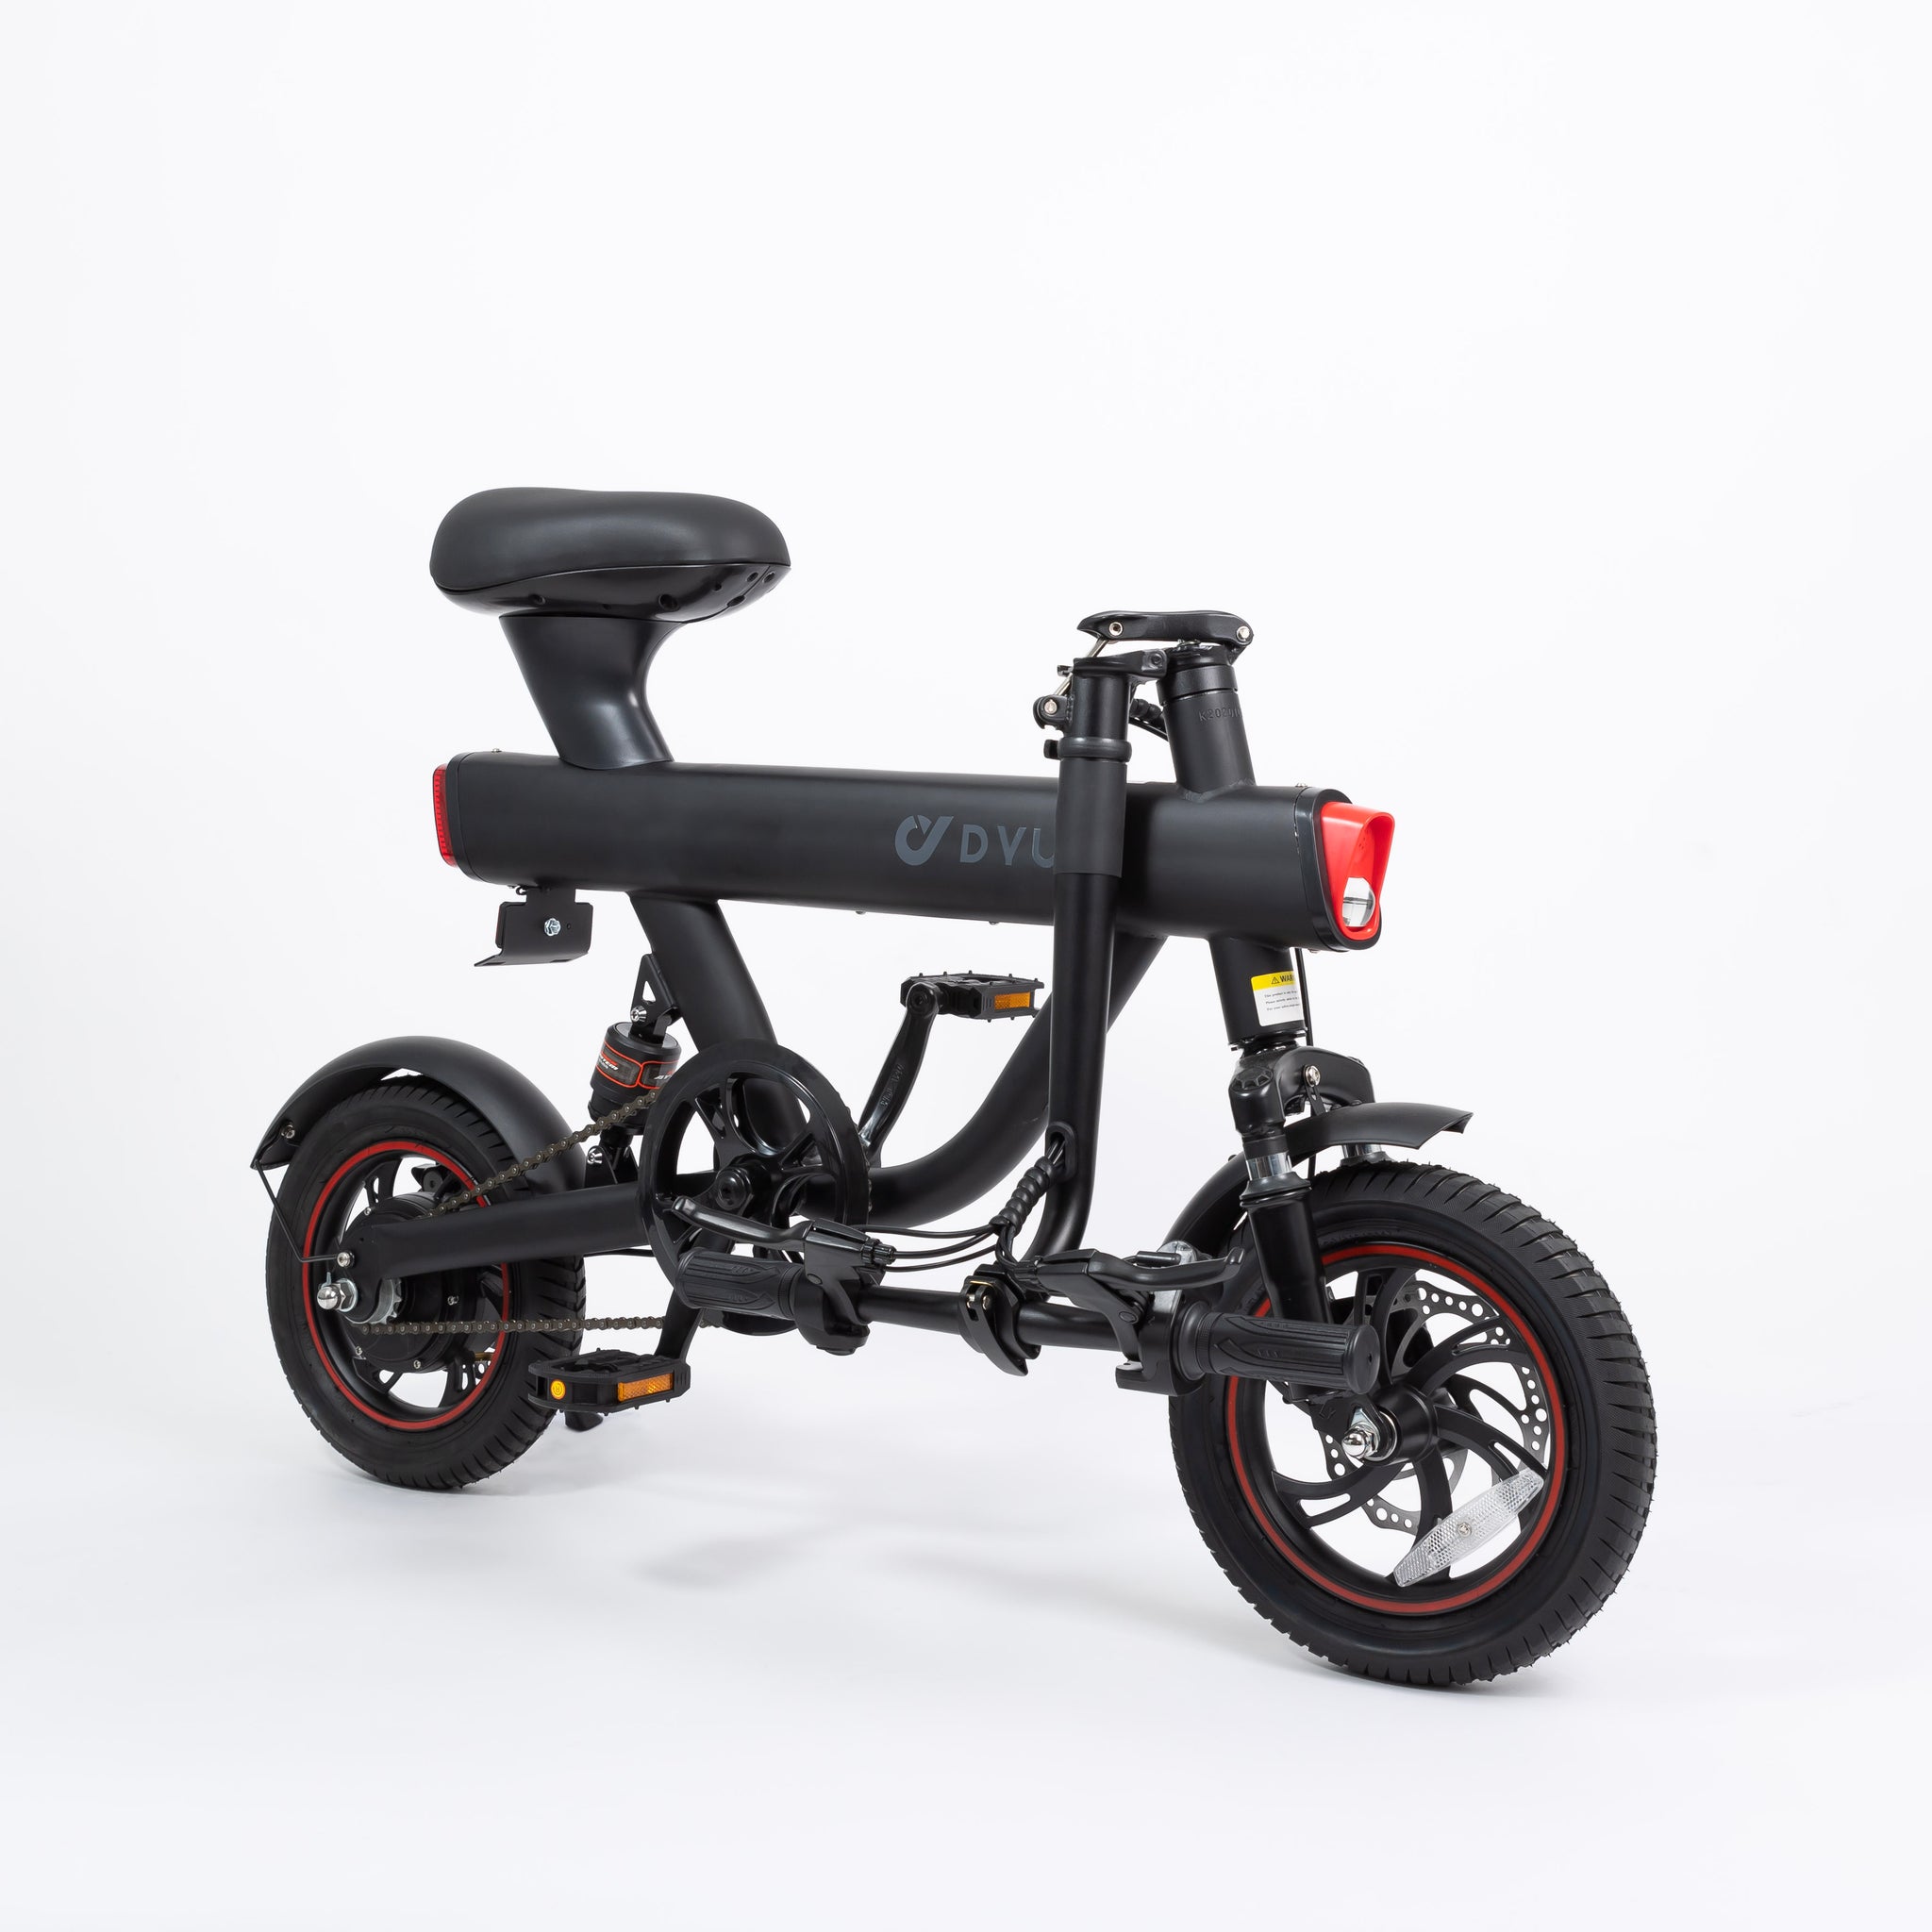 DYU V1 Electric bike. In stock. UK Express Delivery.